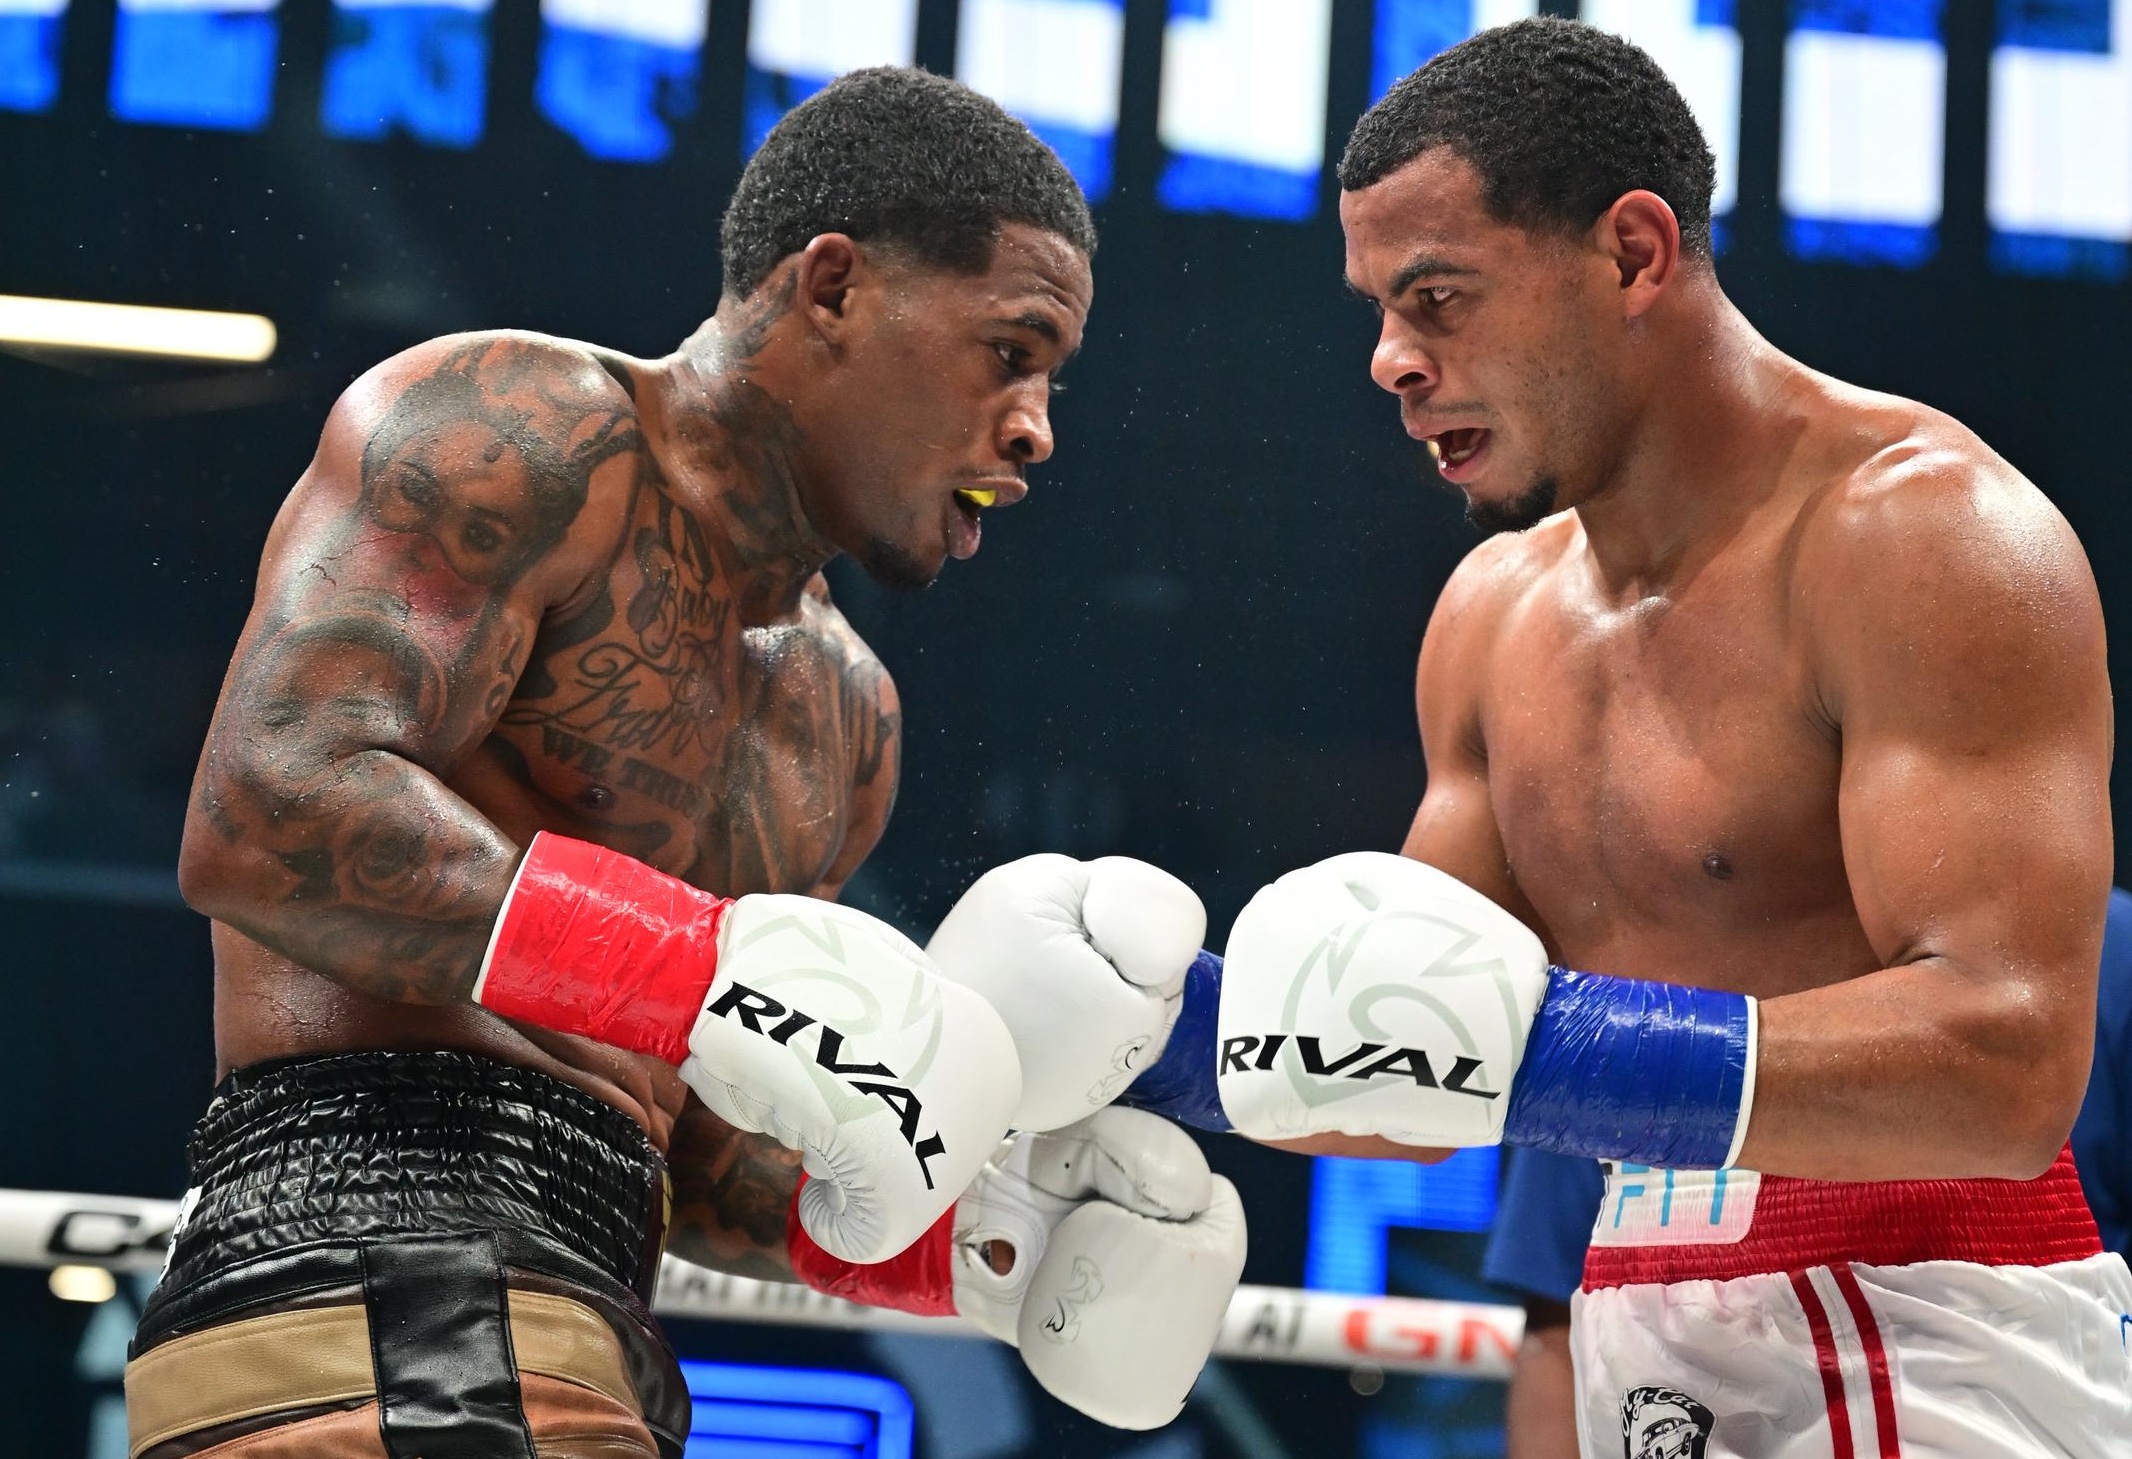 Raiko Santana pulls out upset win in overtime round, sends Lorenzo Simpson to second loss